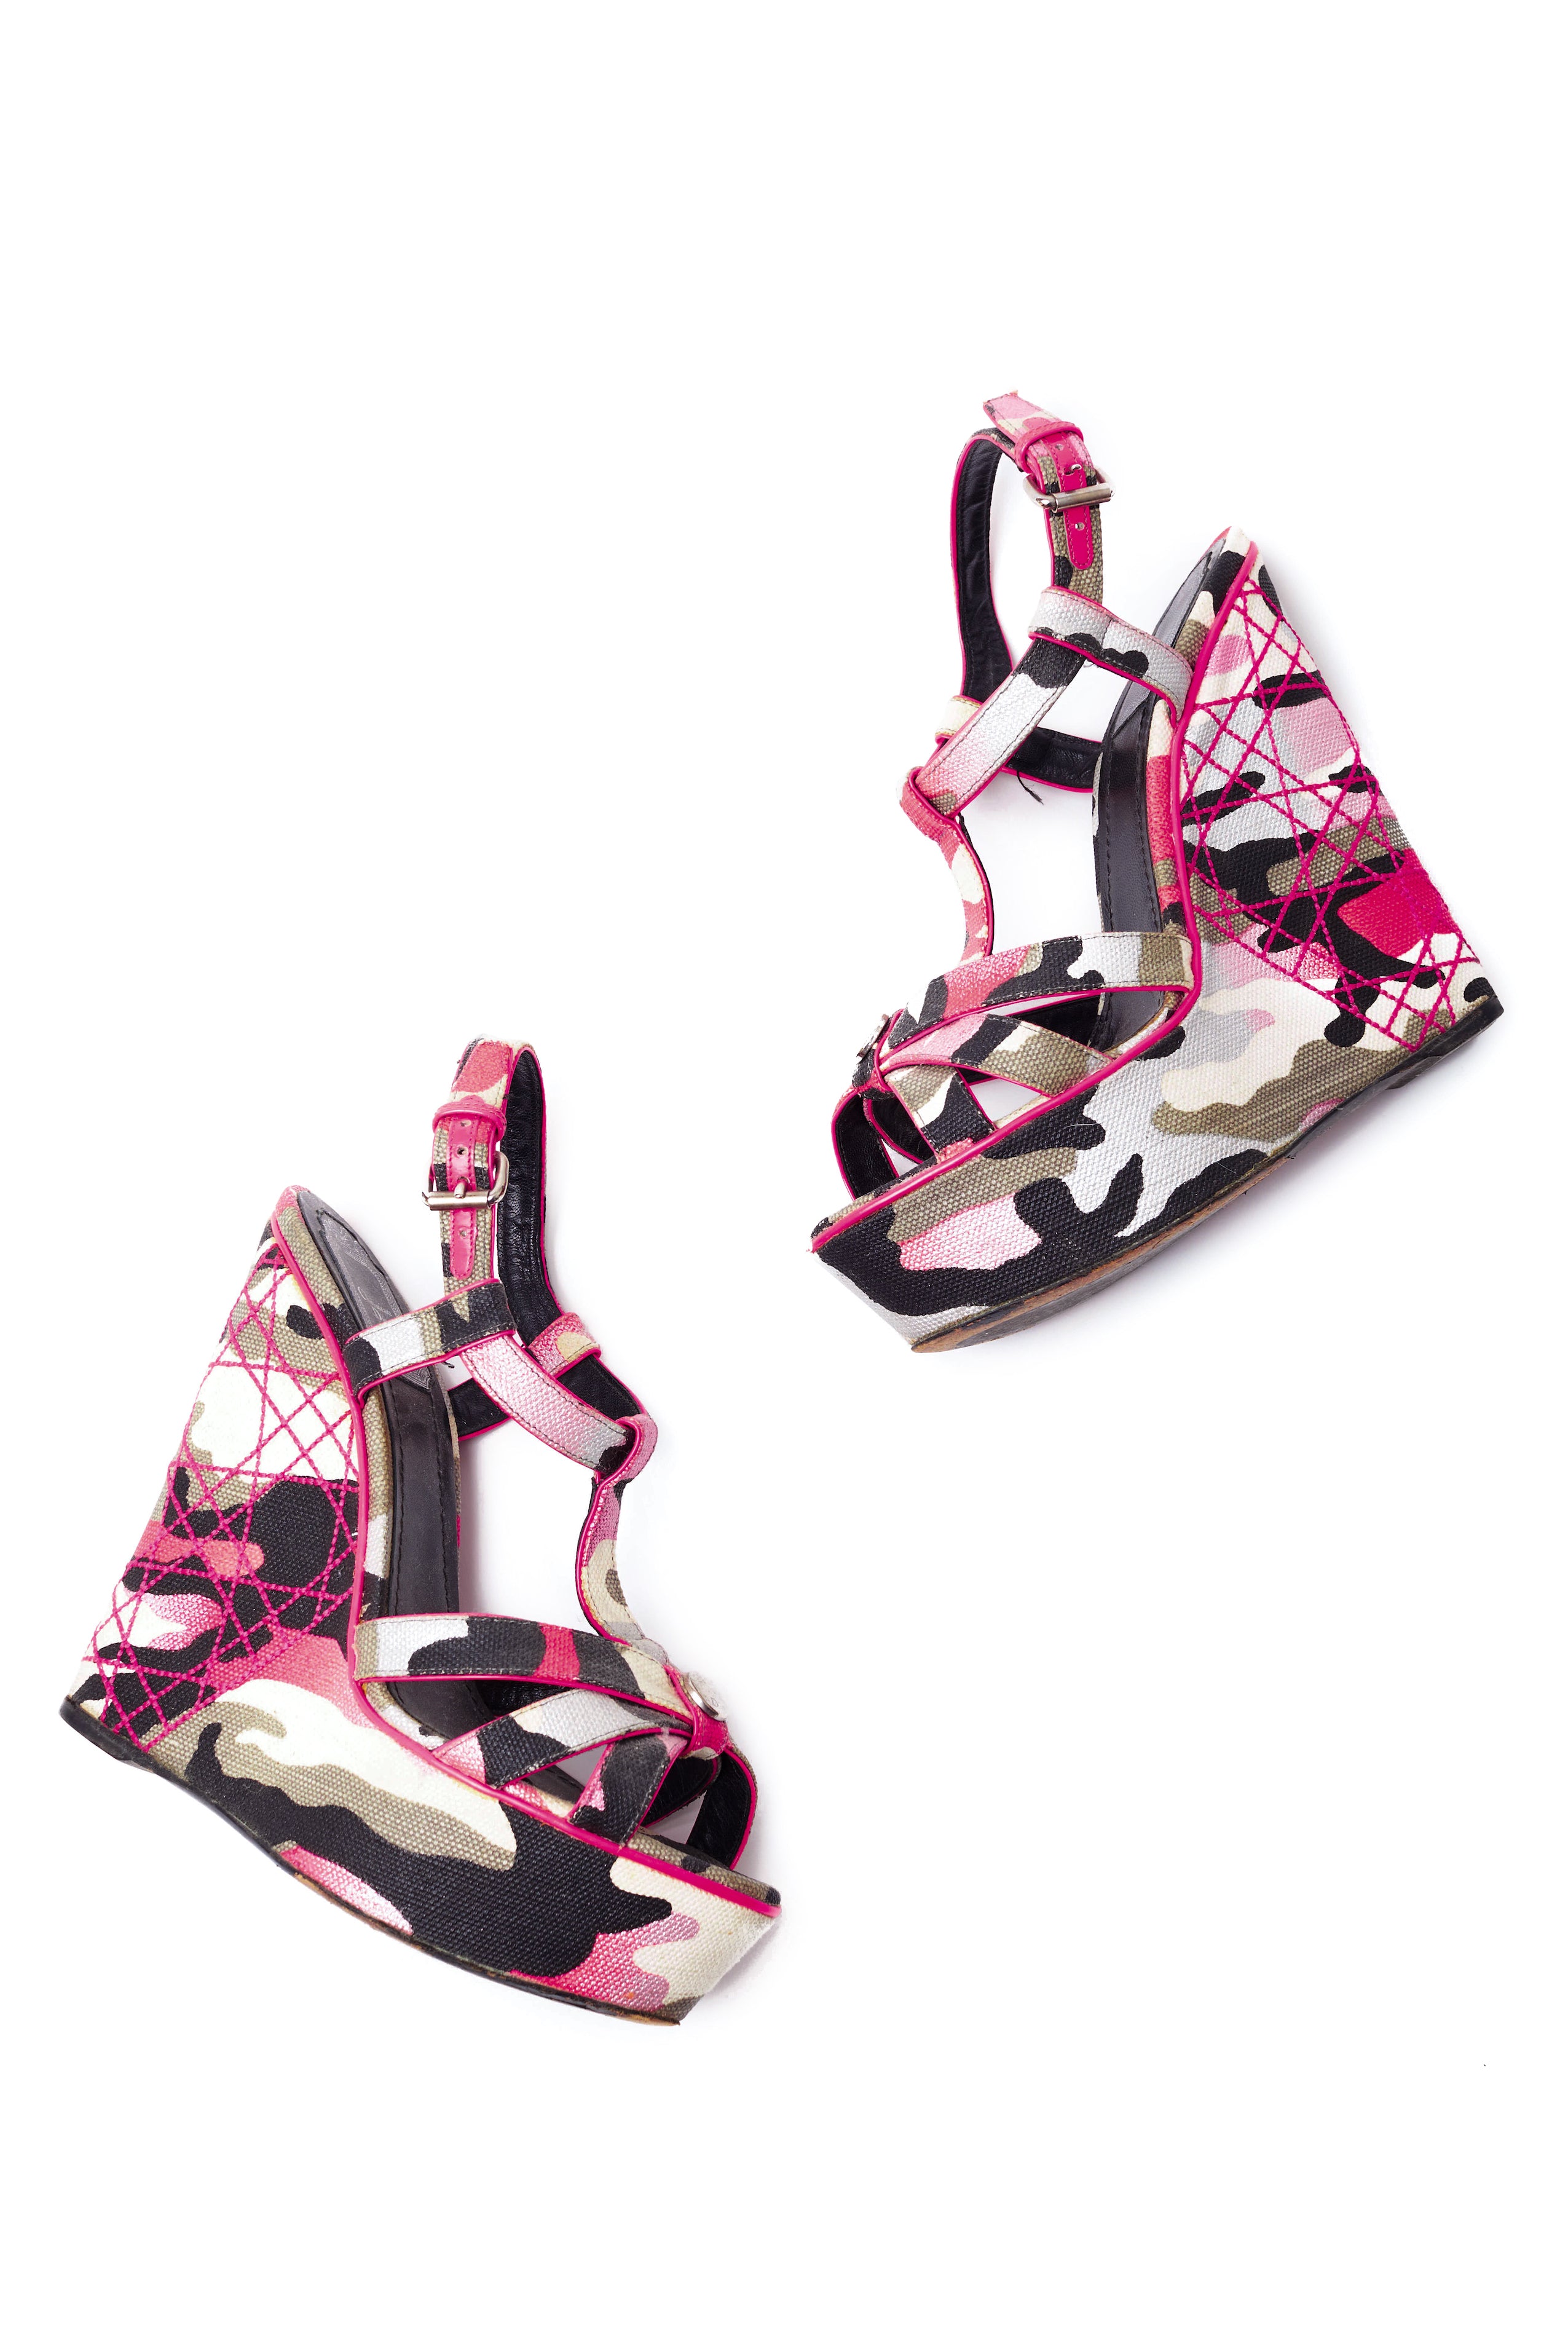 Christian Dior <br> 2011 Anselm Reyle limited edition camouflage wedges